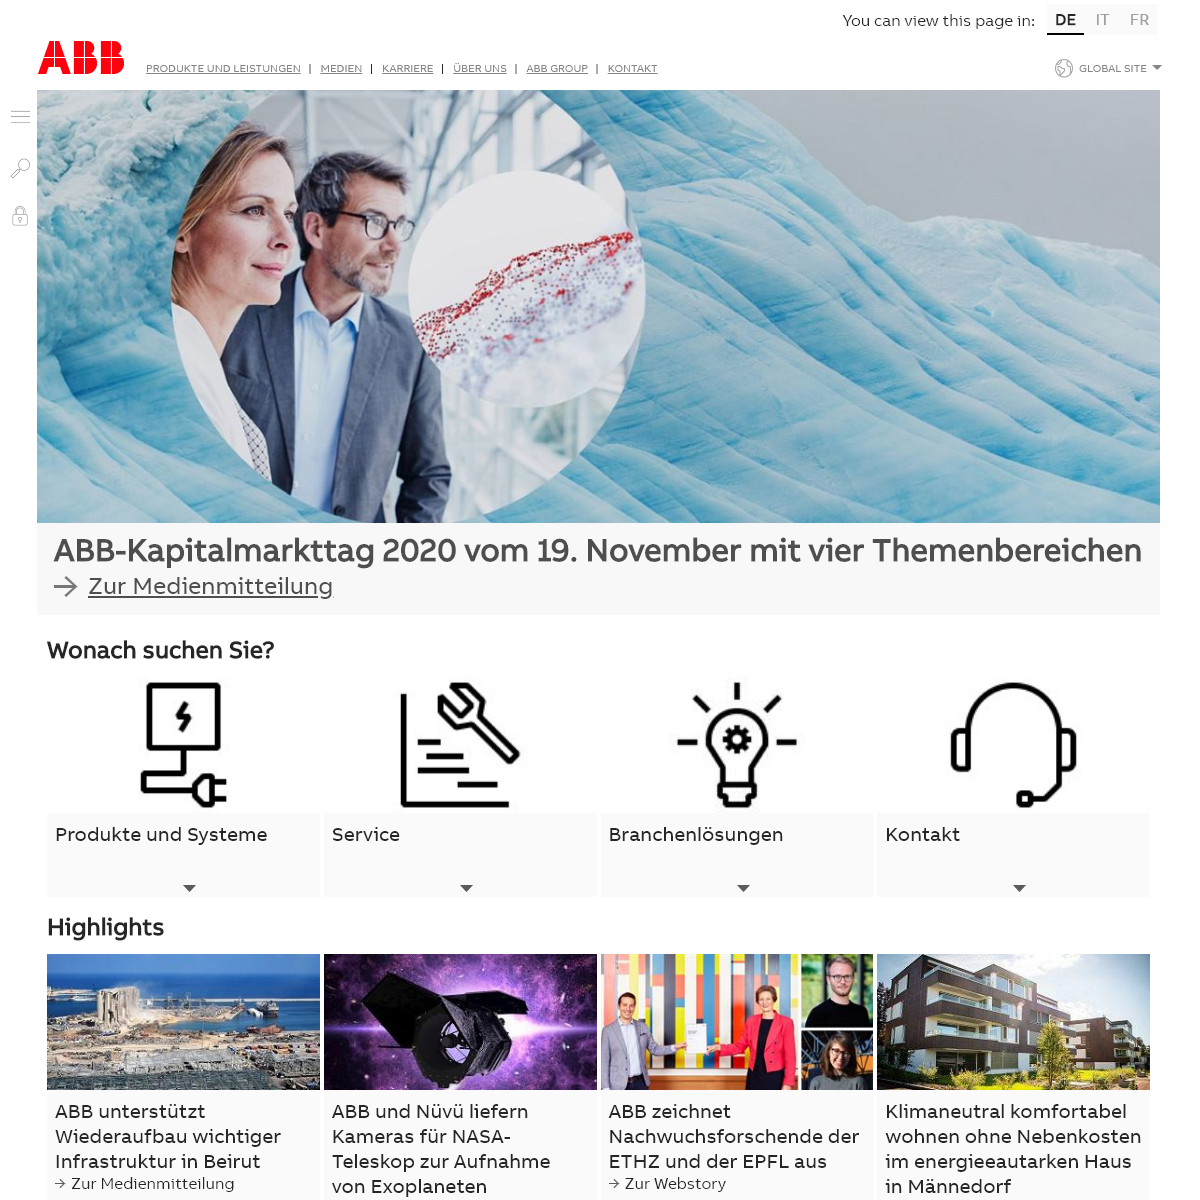 A complete backup of abb.ch